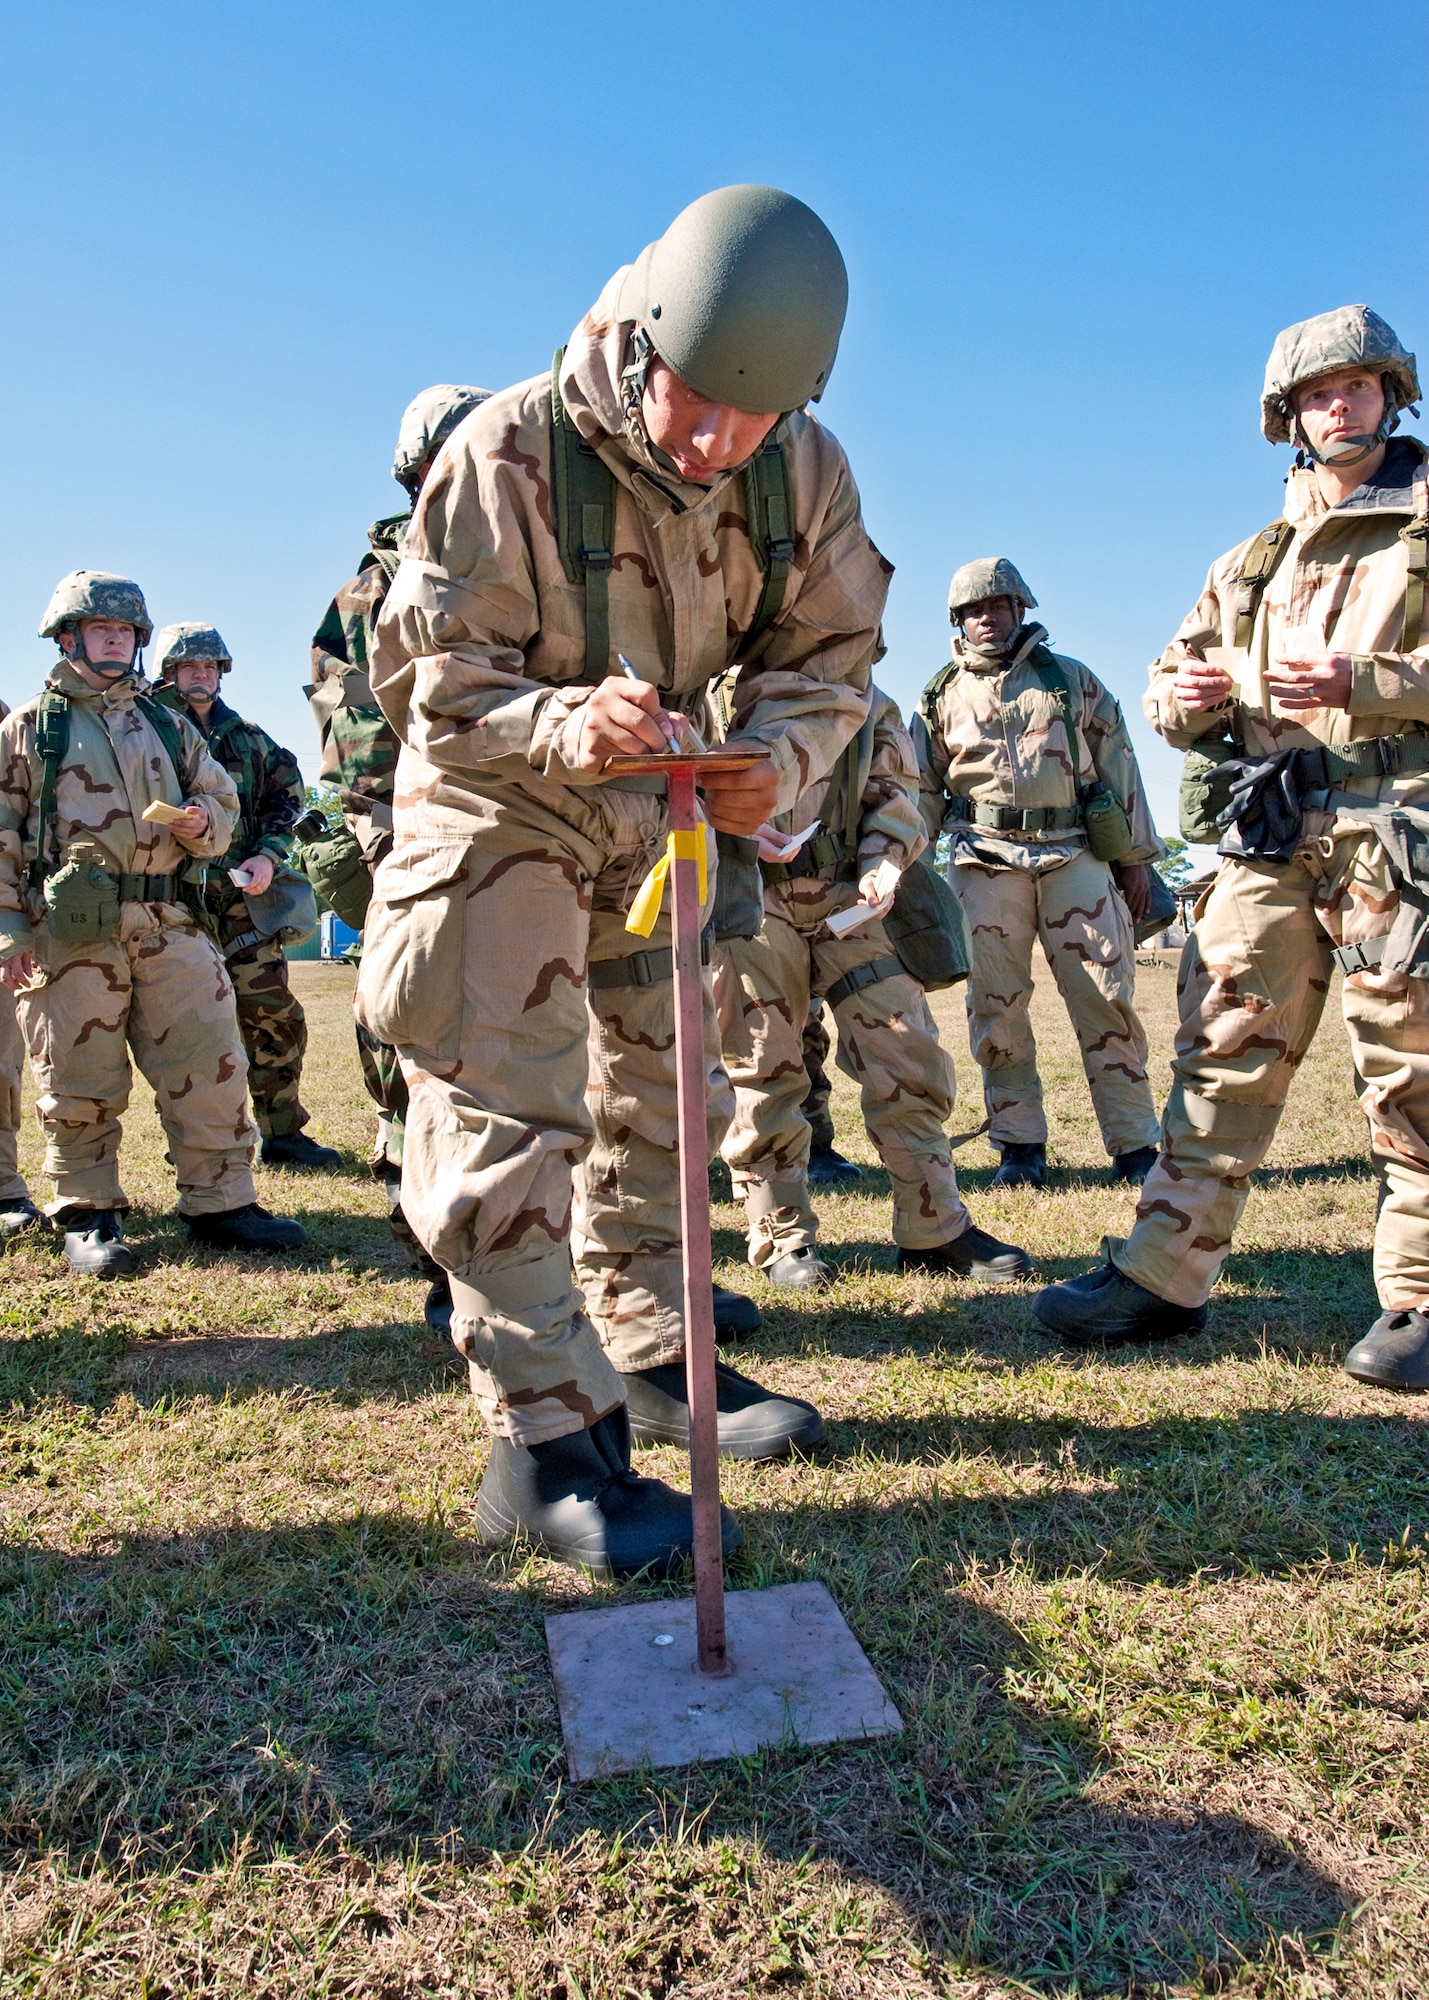 Staff perceptions of military chemical–biological–radiological